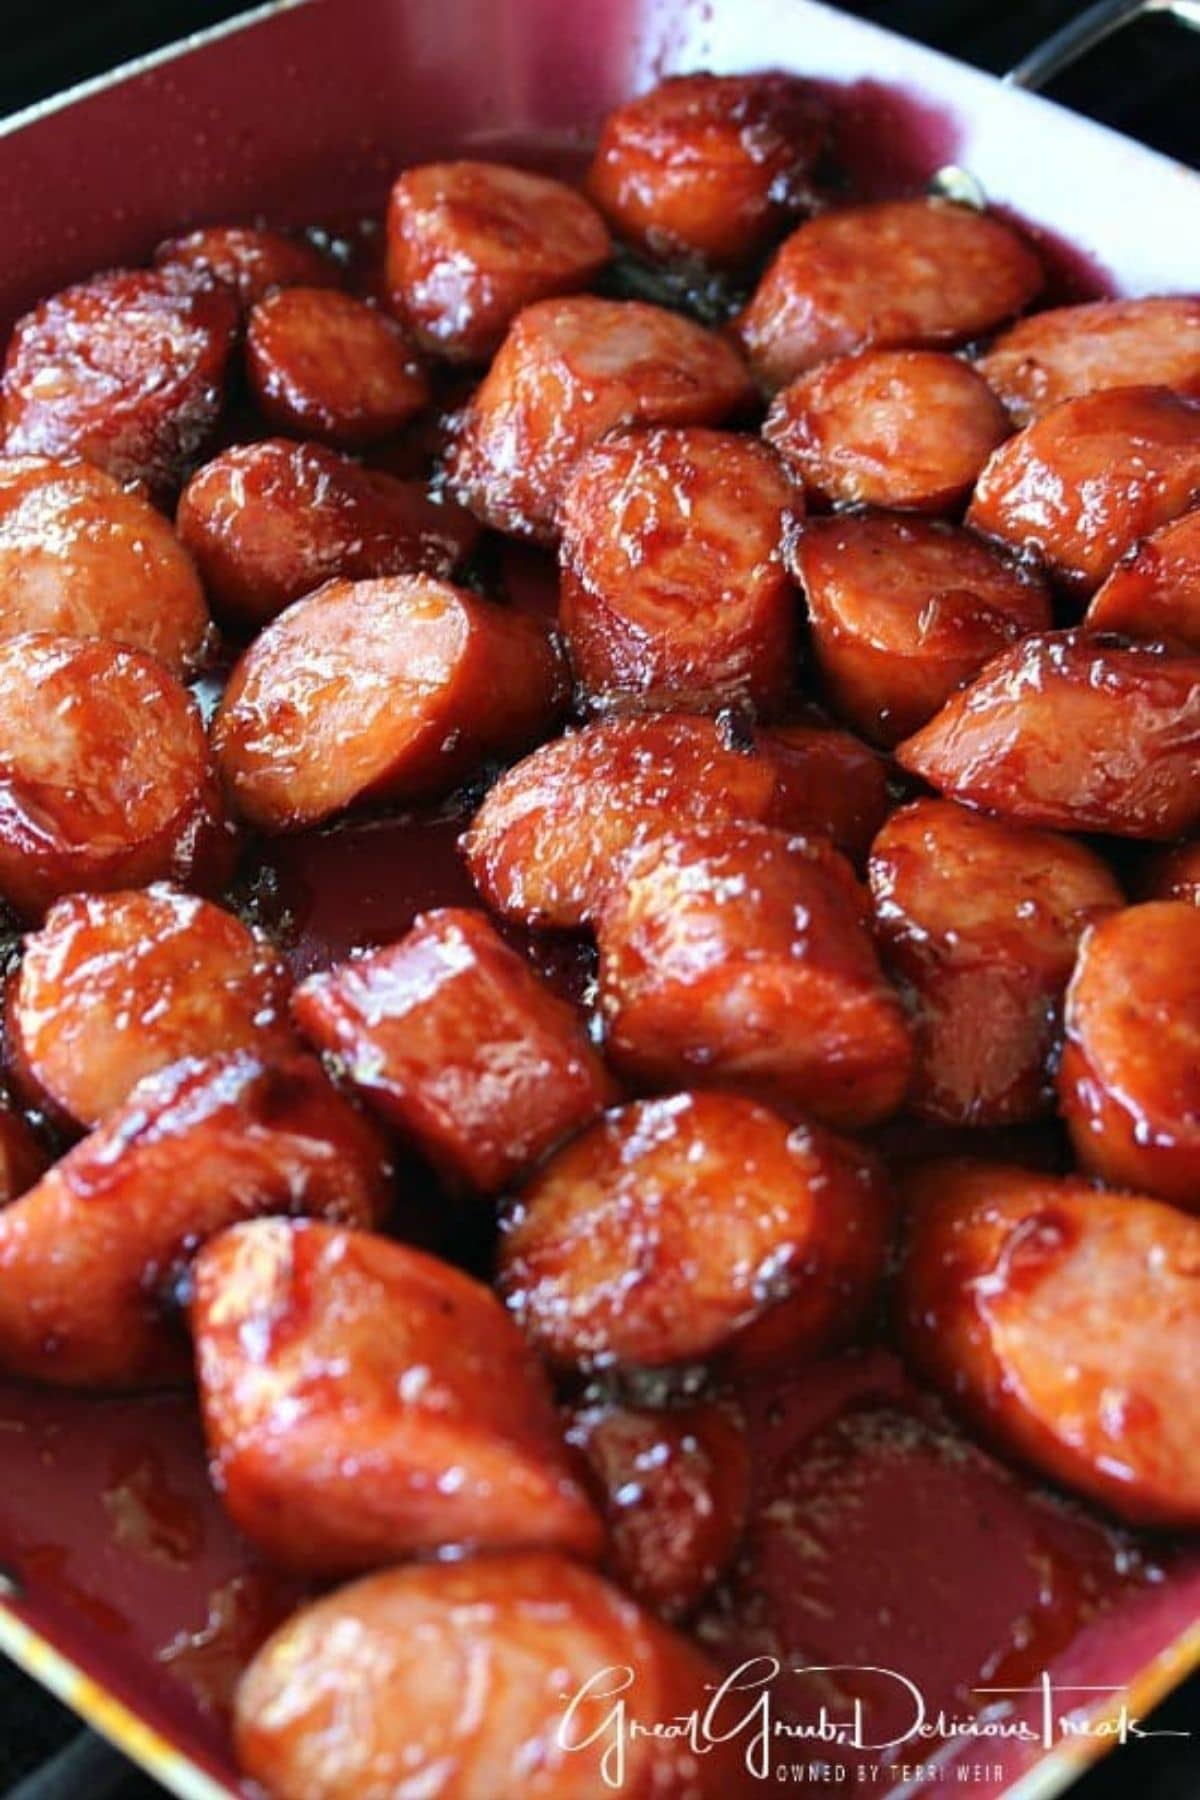 Smoked sausage in dish with barbecue sauce